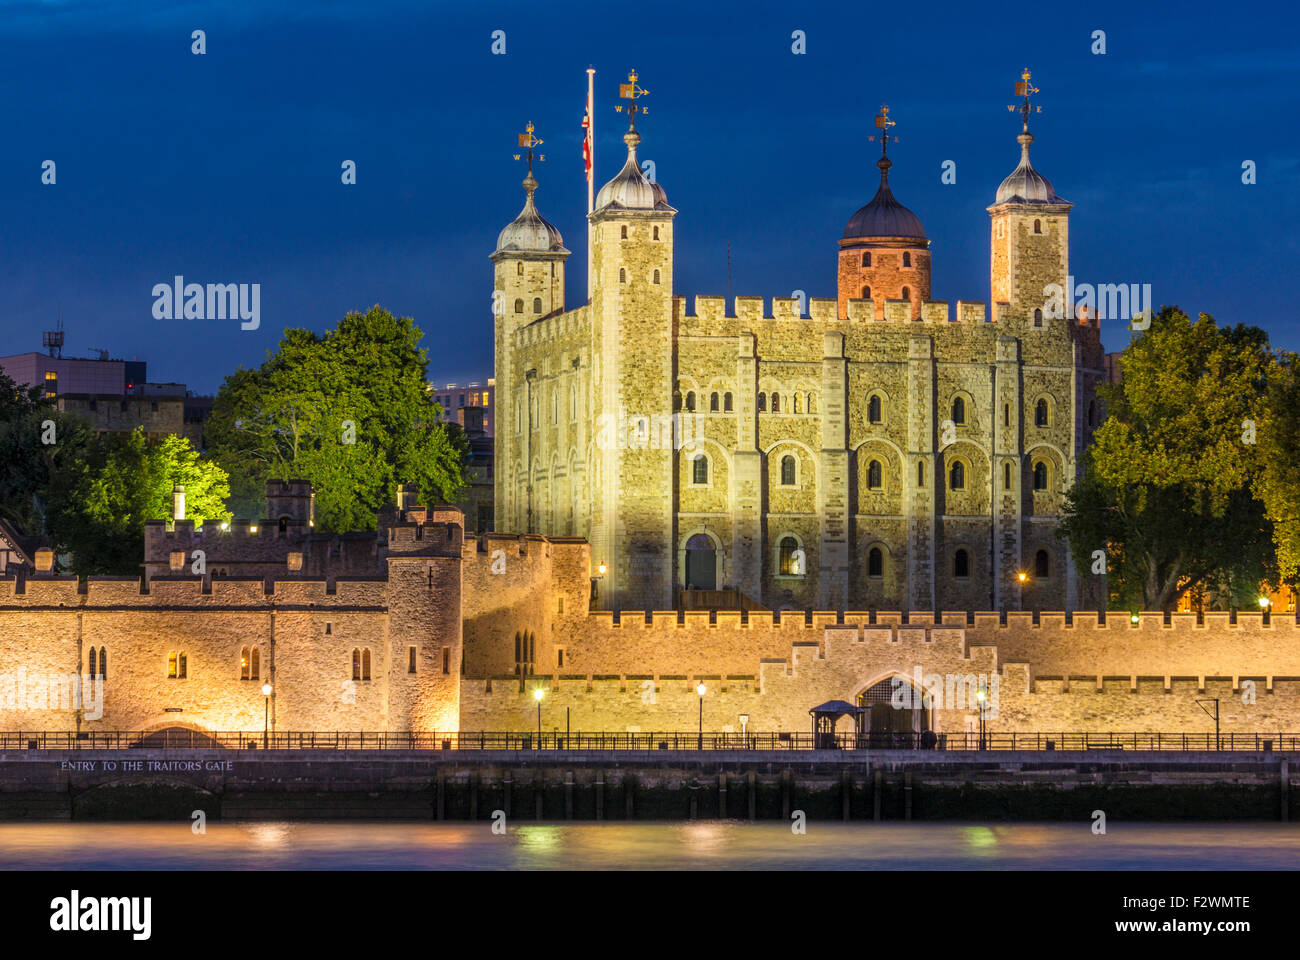 The white tower and castle walls Tower of London night view City of London, England GB UK EU Europe Stock Photo